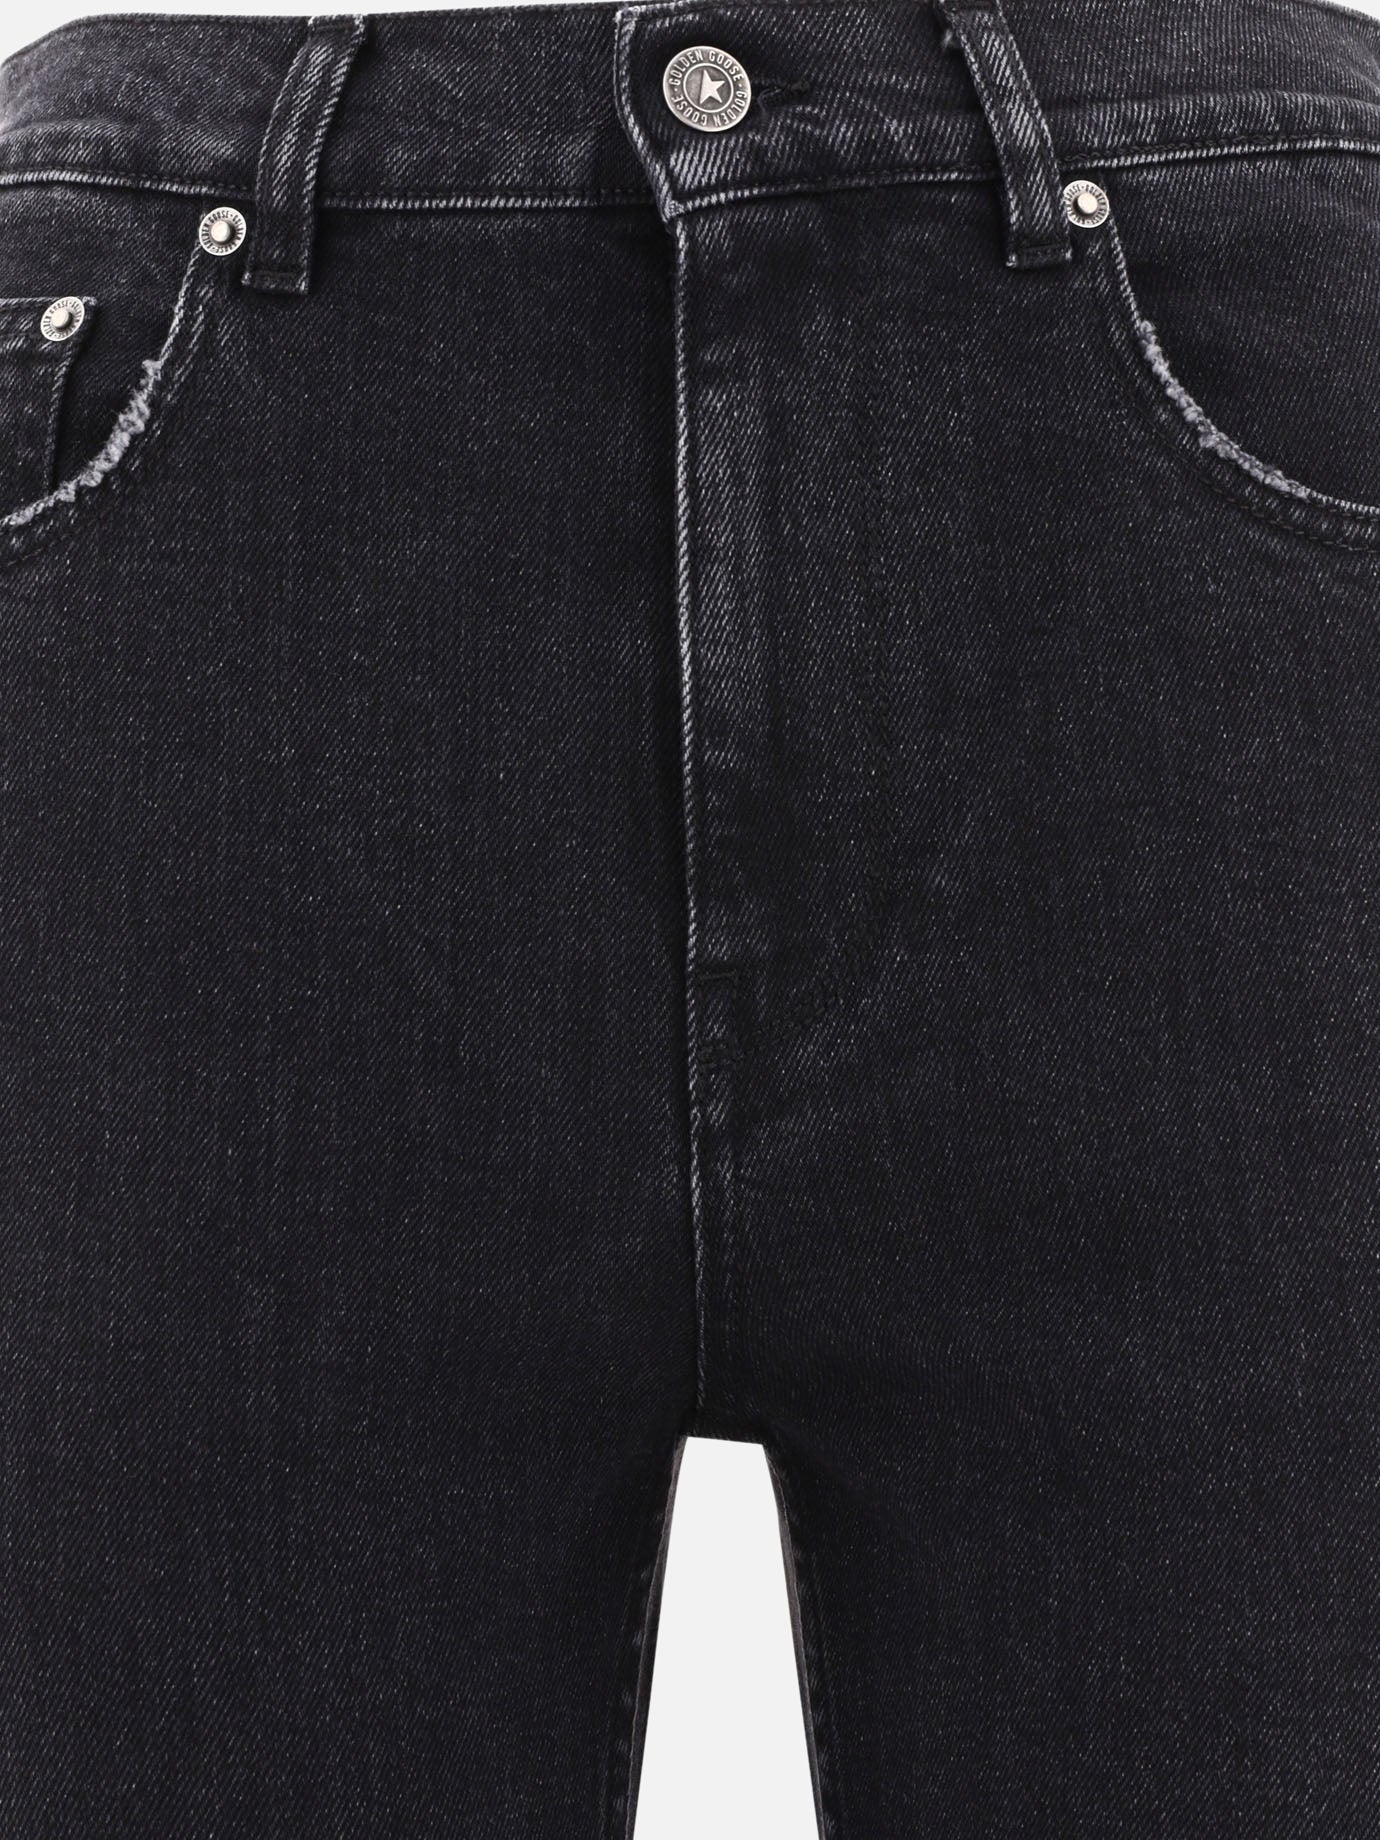 "New Cropped Flare" jeans